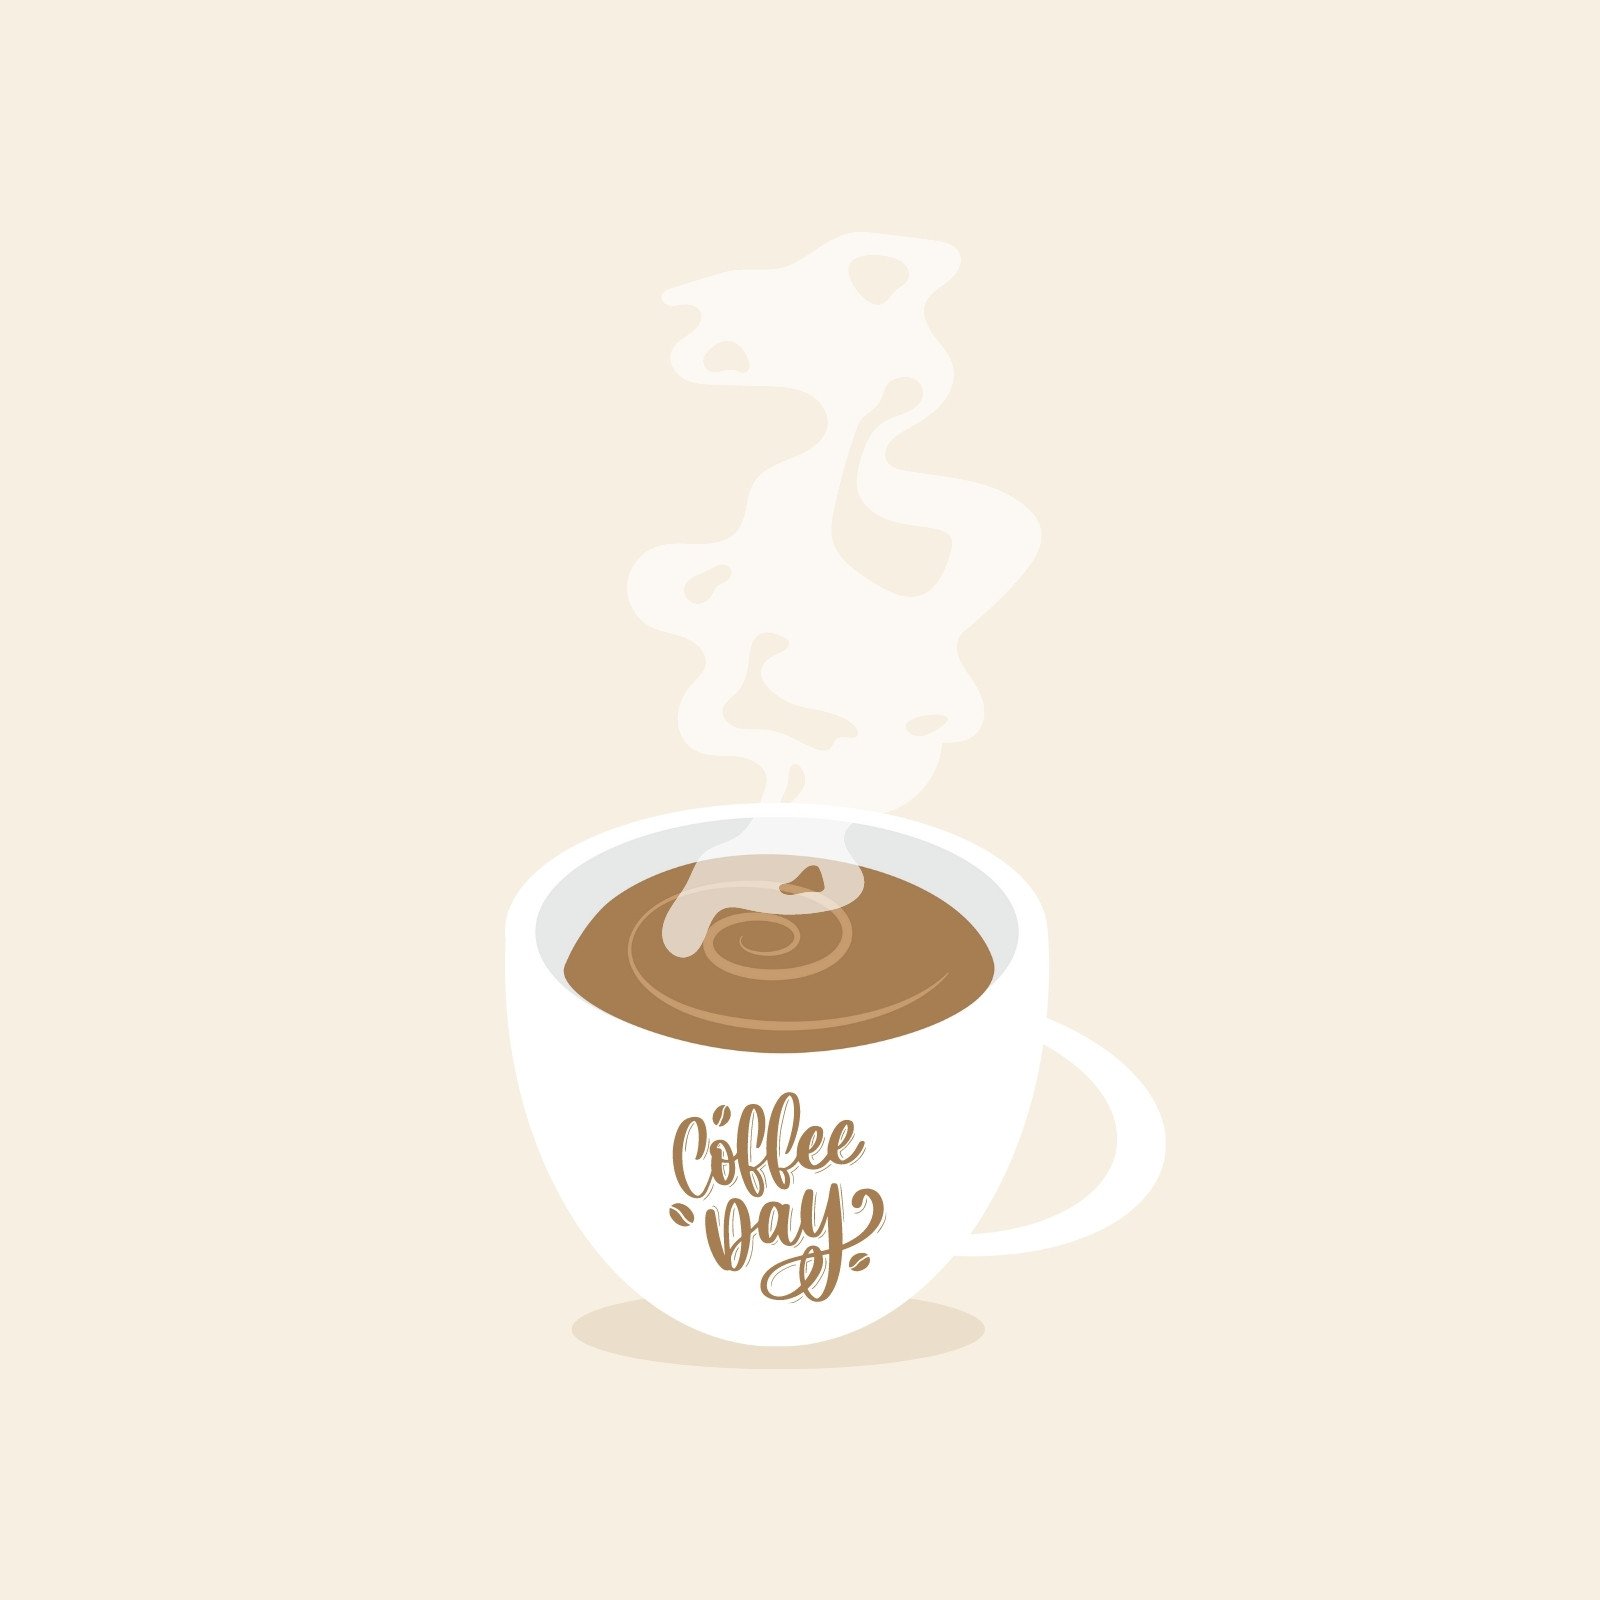 Page 4 - Free and customizable coffee templates